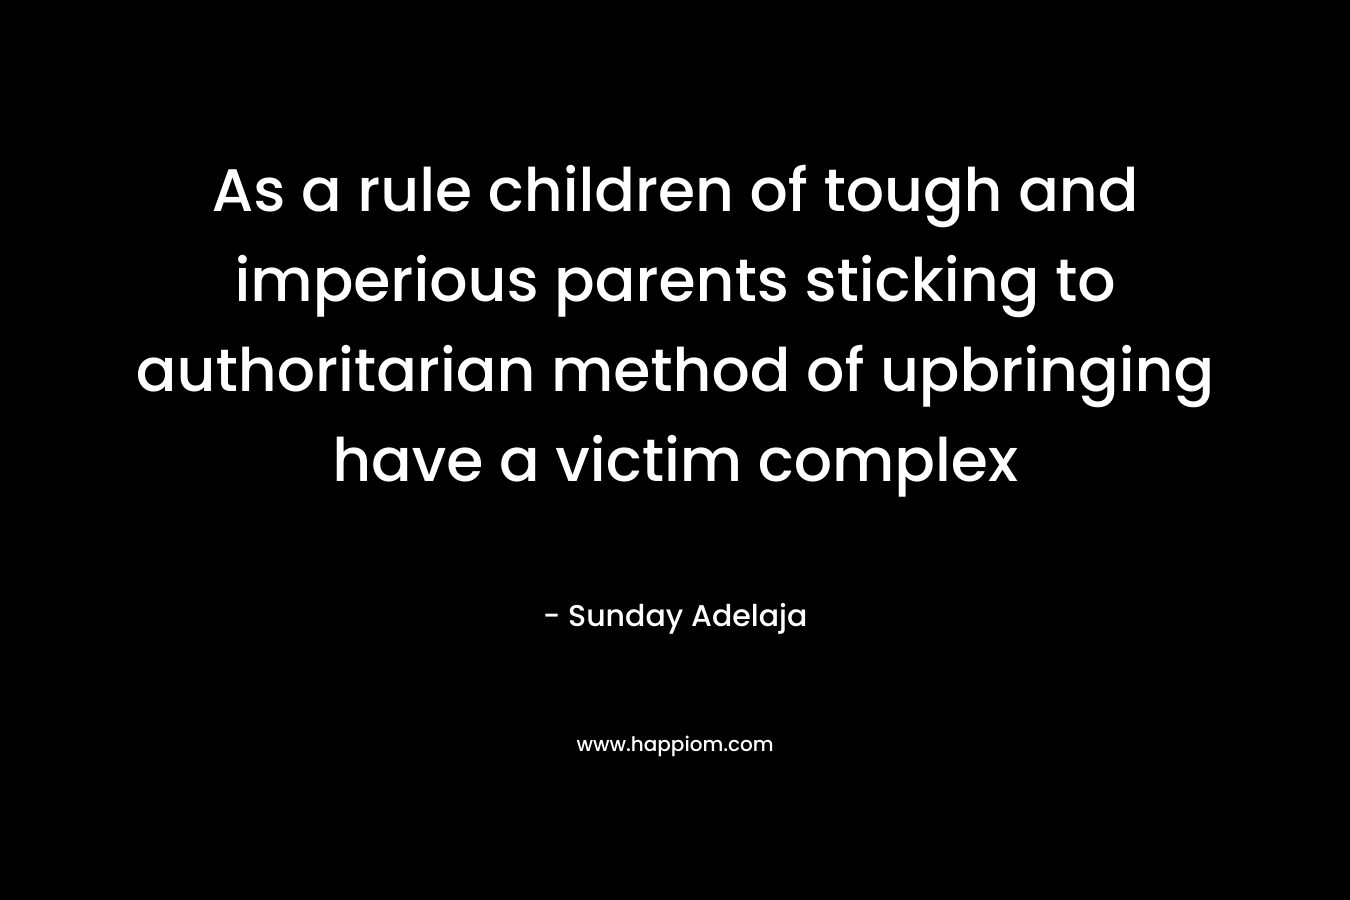 As a rule children of tough and imperious parents sticking to authoritarian method of upbringing have a victim complex – Sunday Adelaja